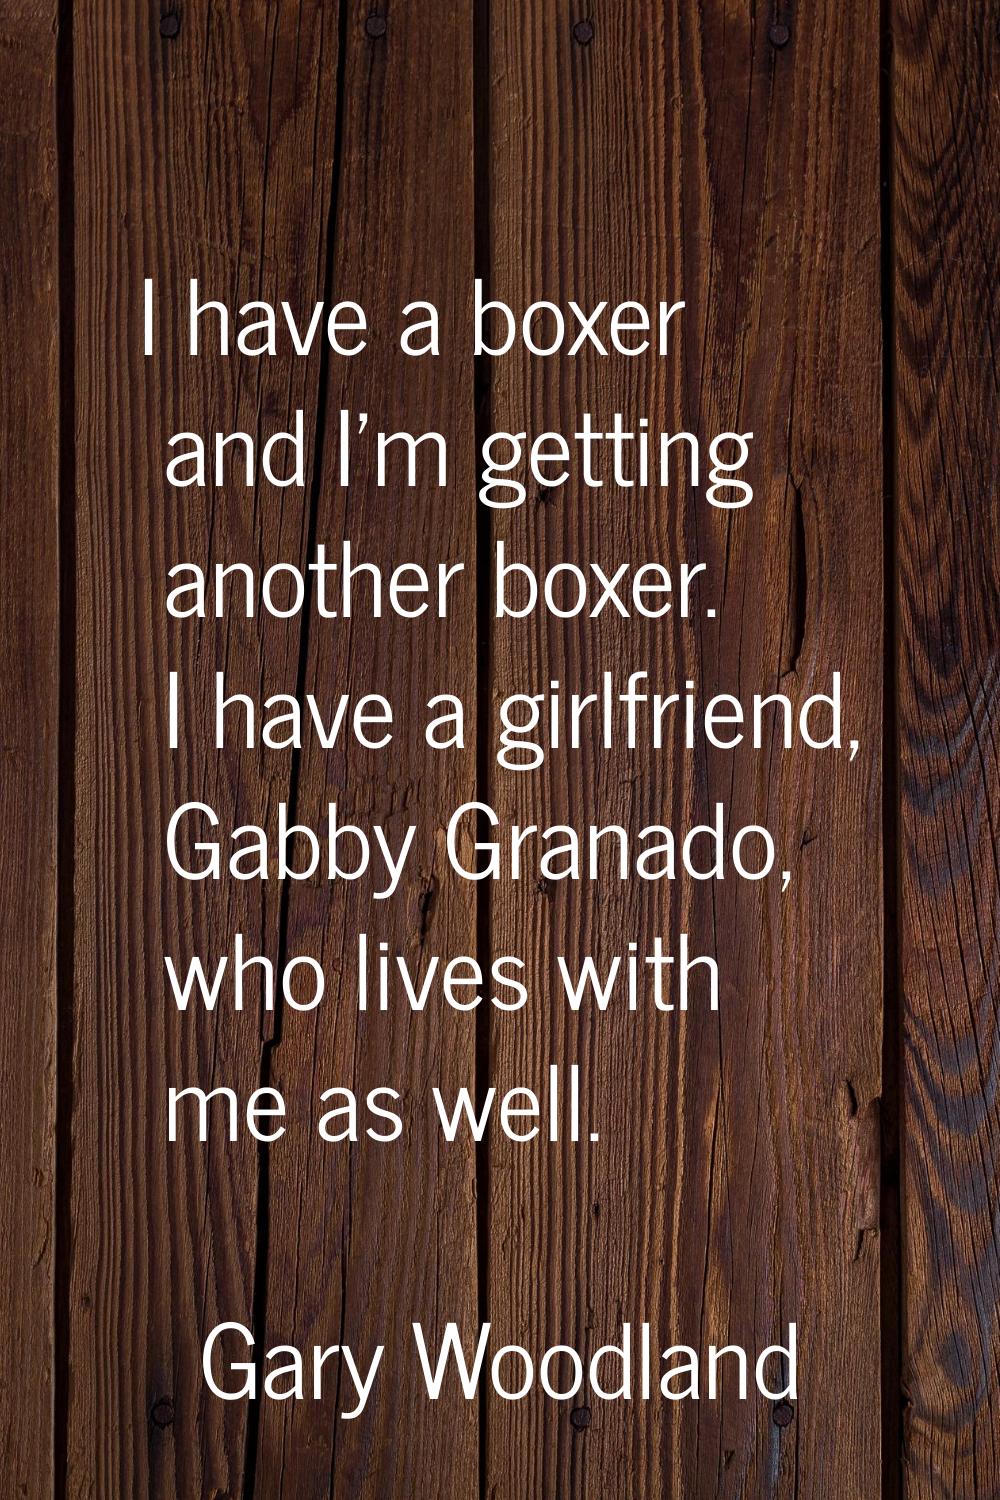 I have a boxer and I'm getting another boxer. I have a girlfriend, Gabby Granado, who lives with me